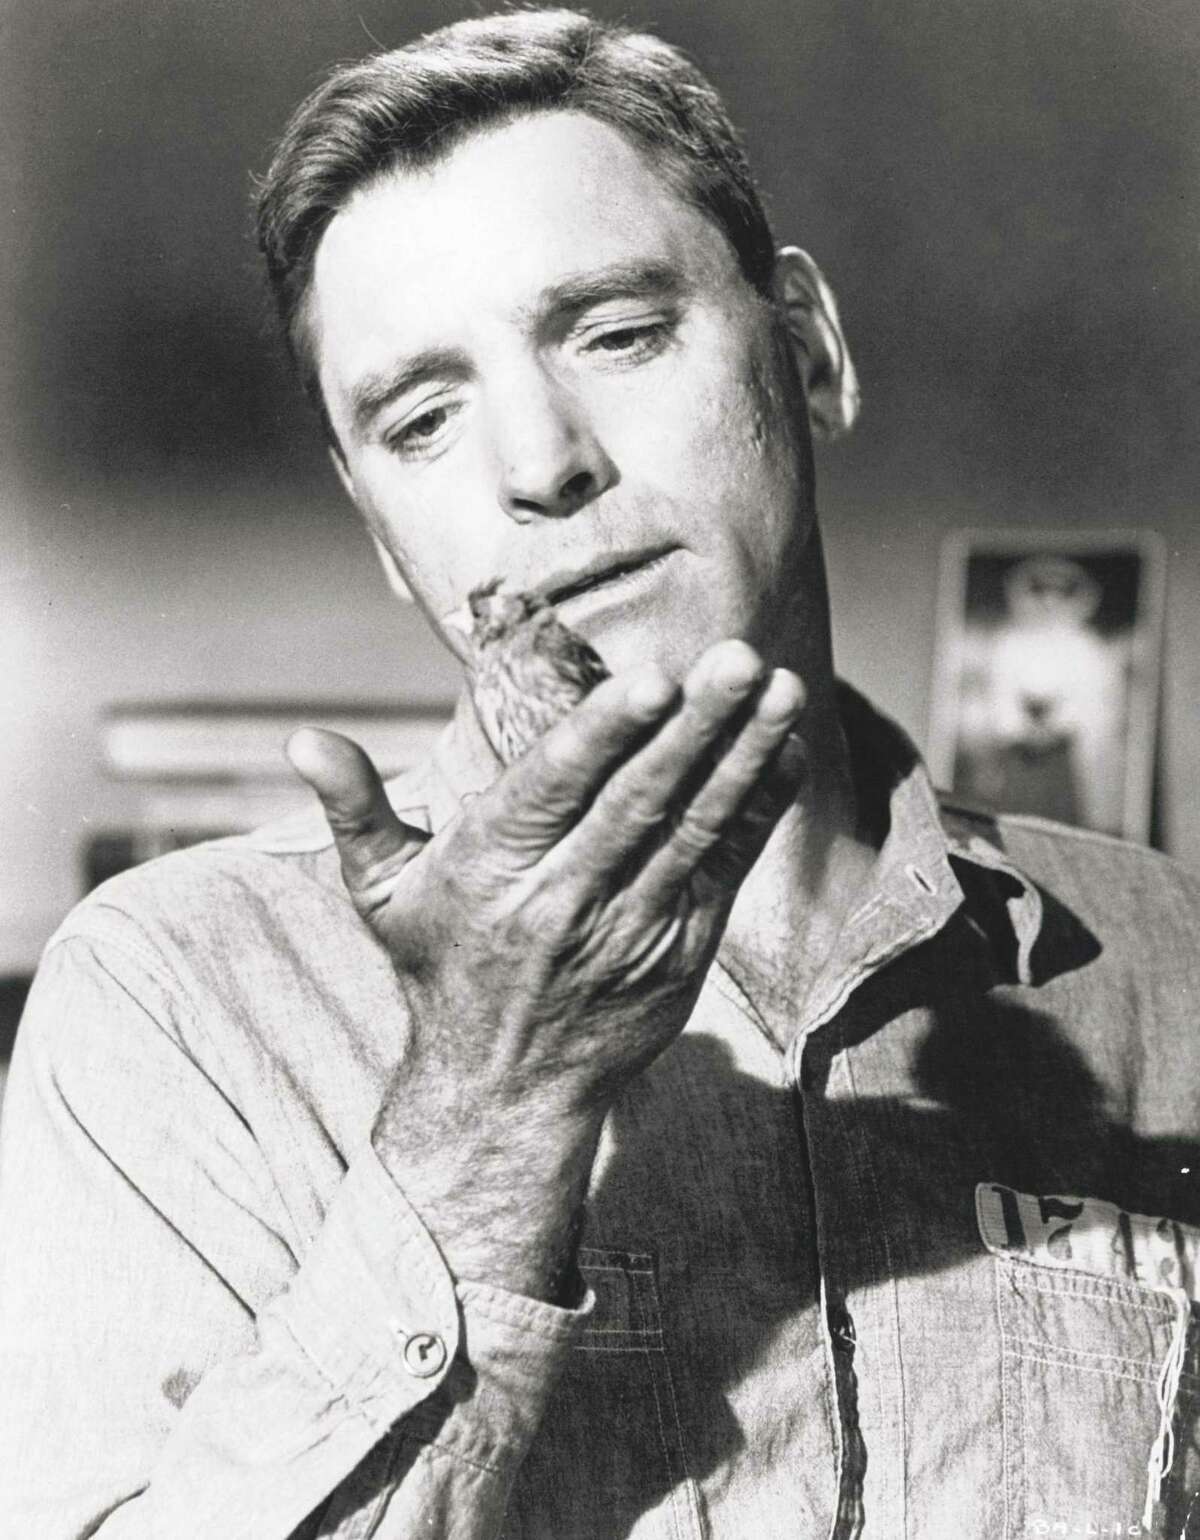 A case can be made for “Birdman of Alcatraz” as one of Burt Lancaster’s top films.